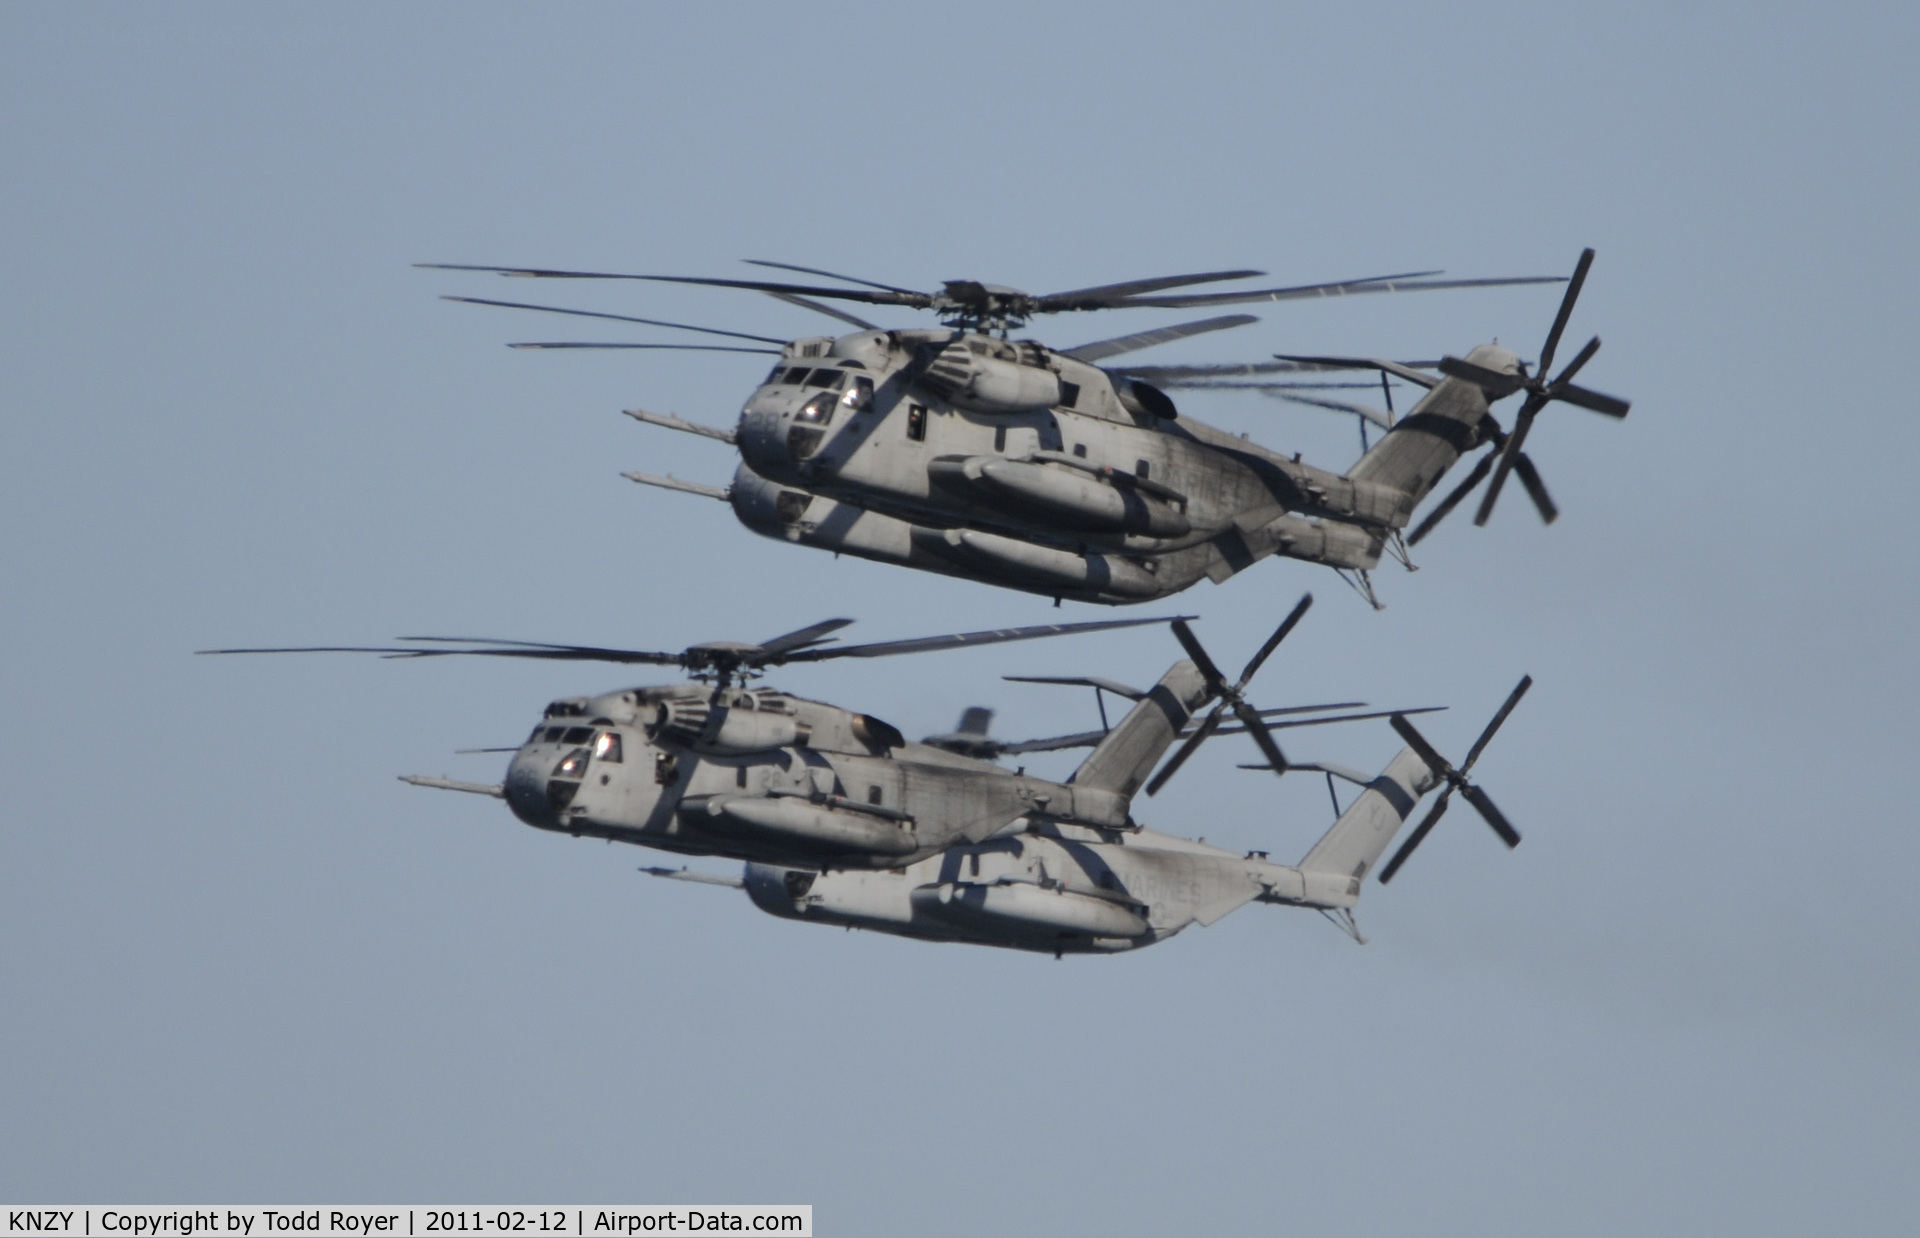 North Island Nas /halsey Field/ Airport (NZY) - The big boys of Marine helicopters